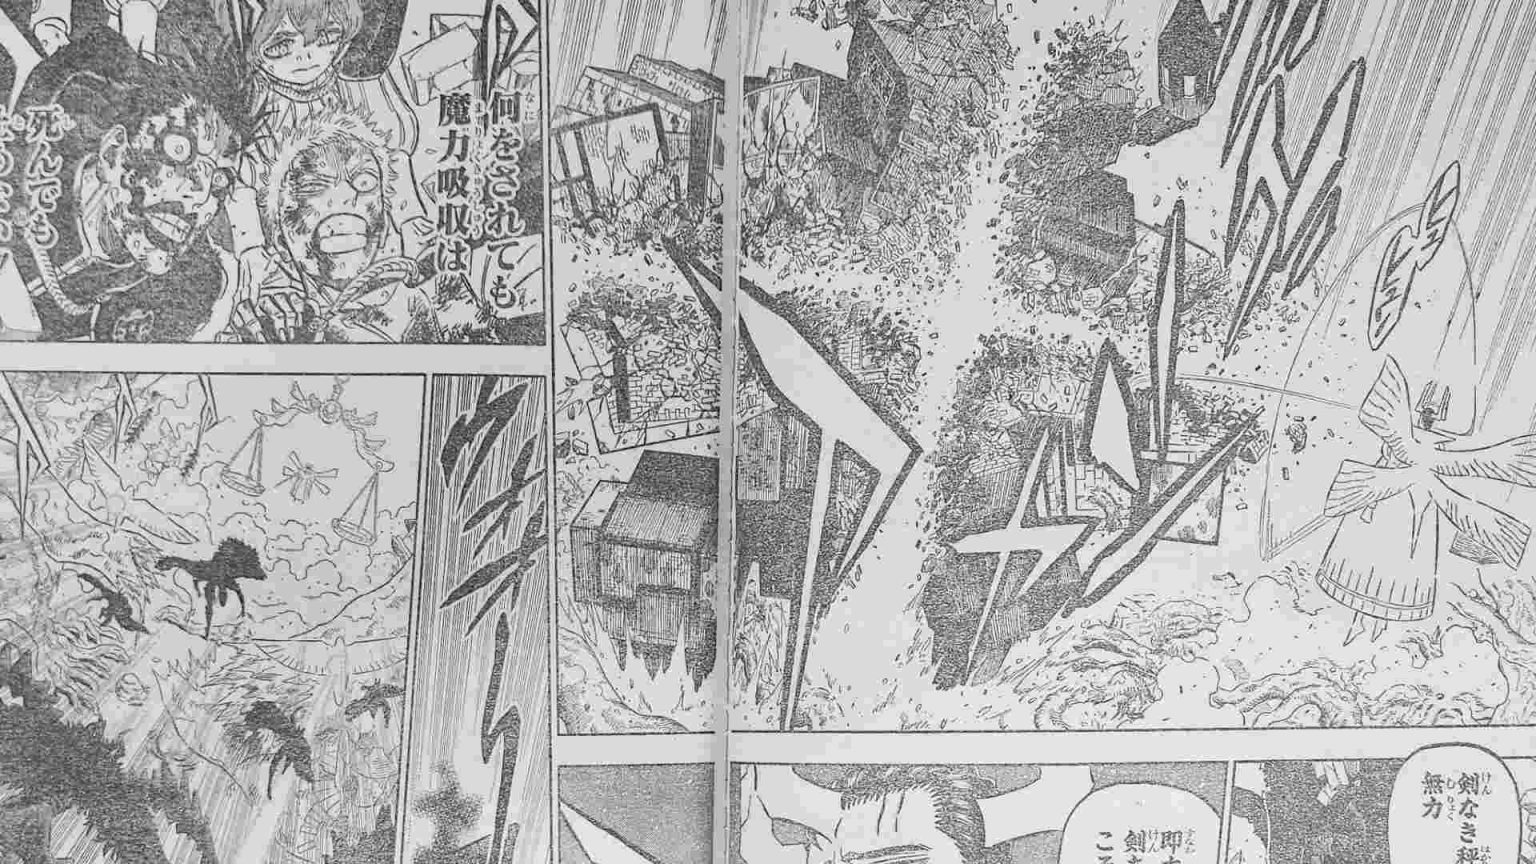 Black Clover Chapter 364 Raw Scans Spoilers And Summary Sportslumo